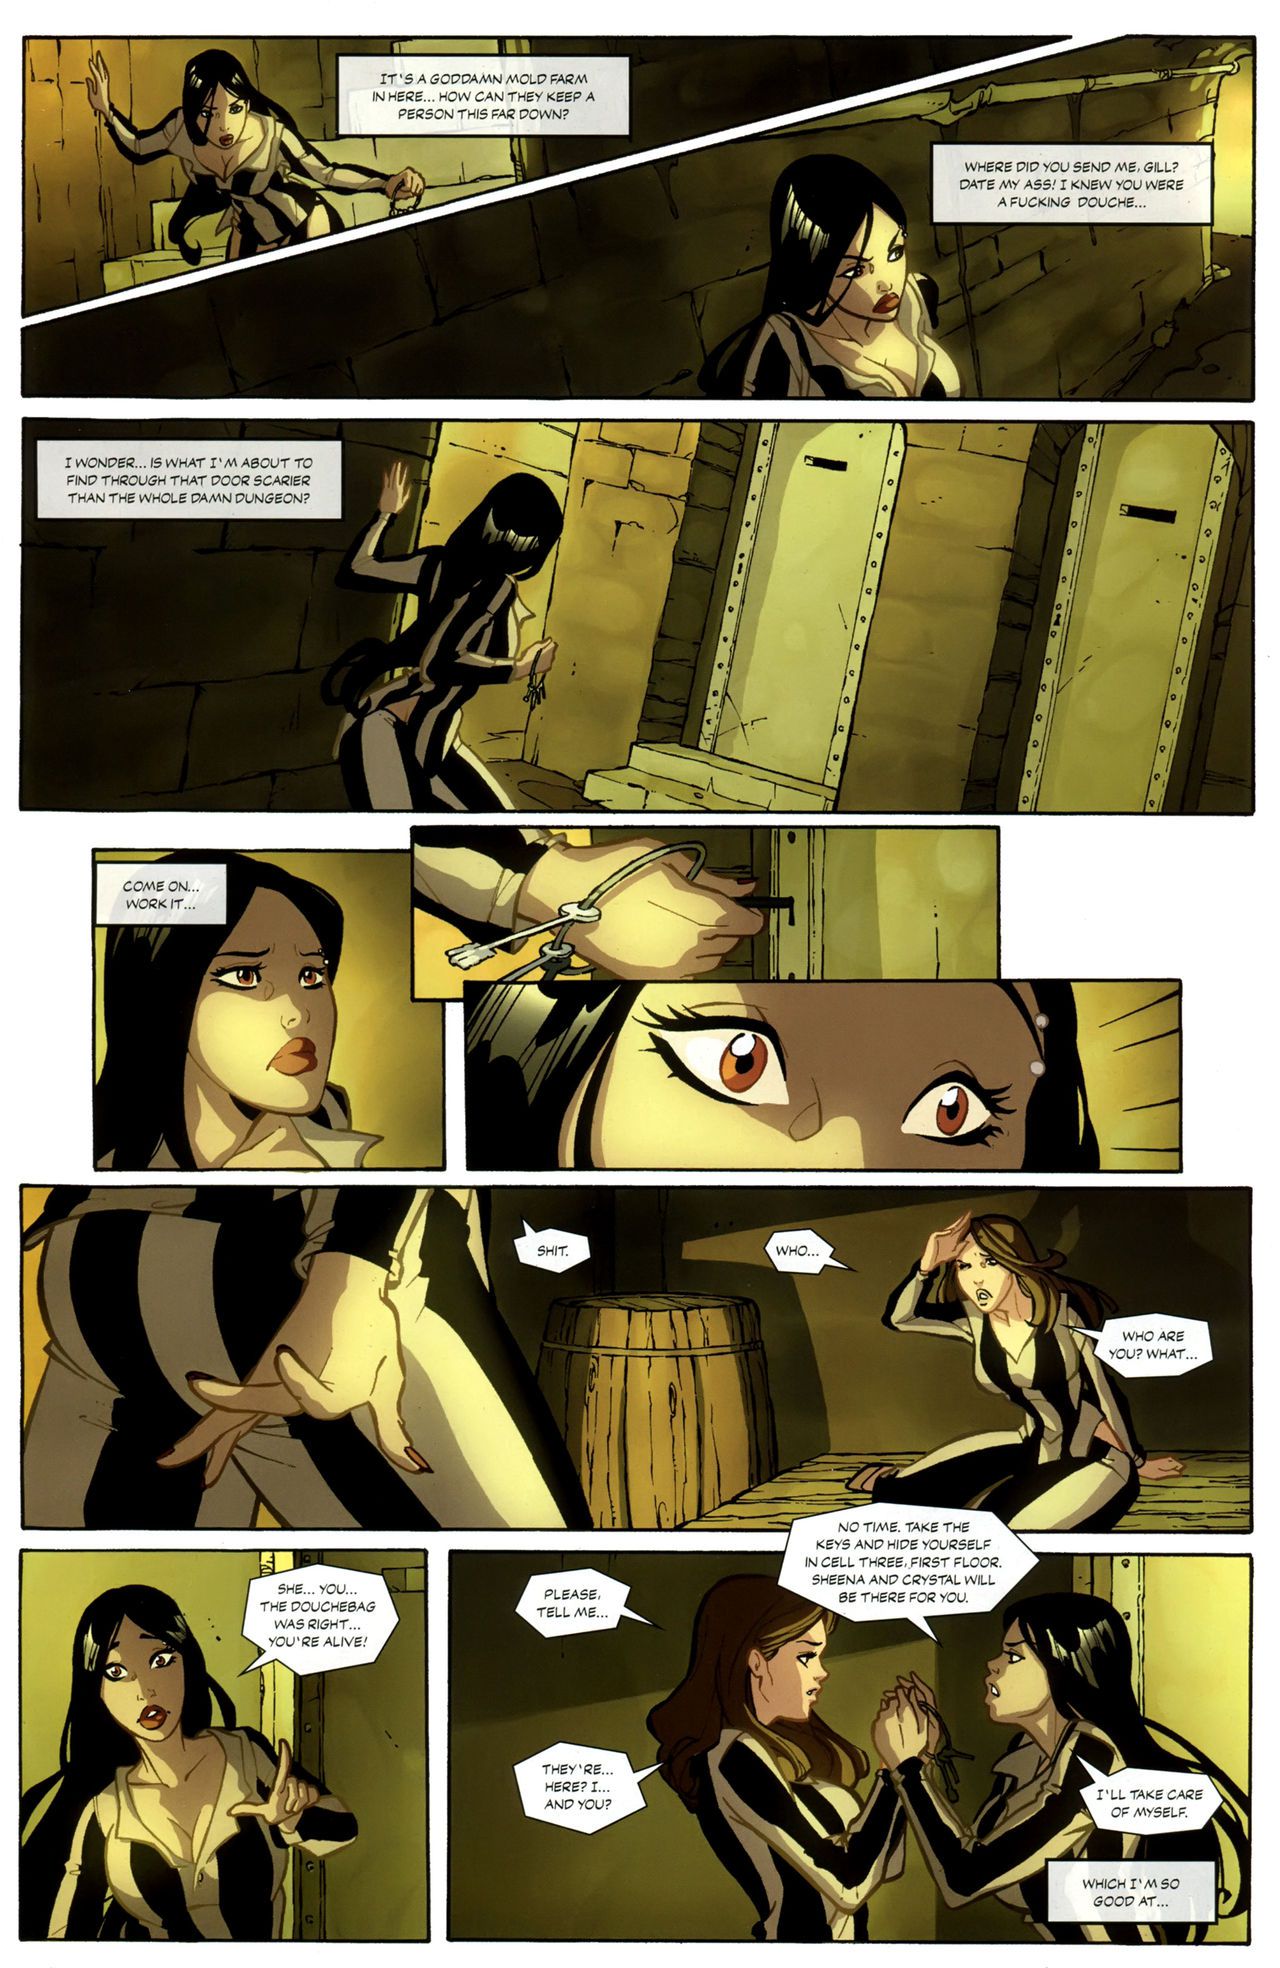 [gg studio (Giuliano Monni, Vincenzo Cucca)] Route des Maisons Rouges - 07 - The Route Of All Evil [English] 10